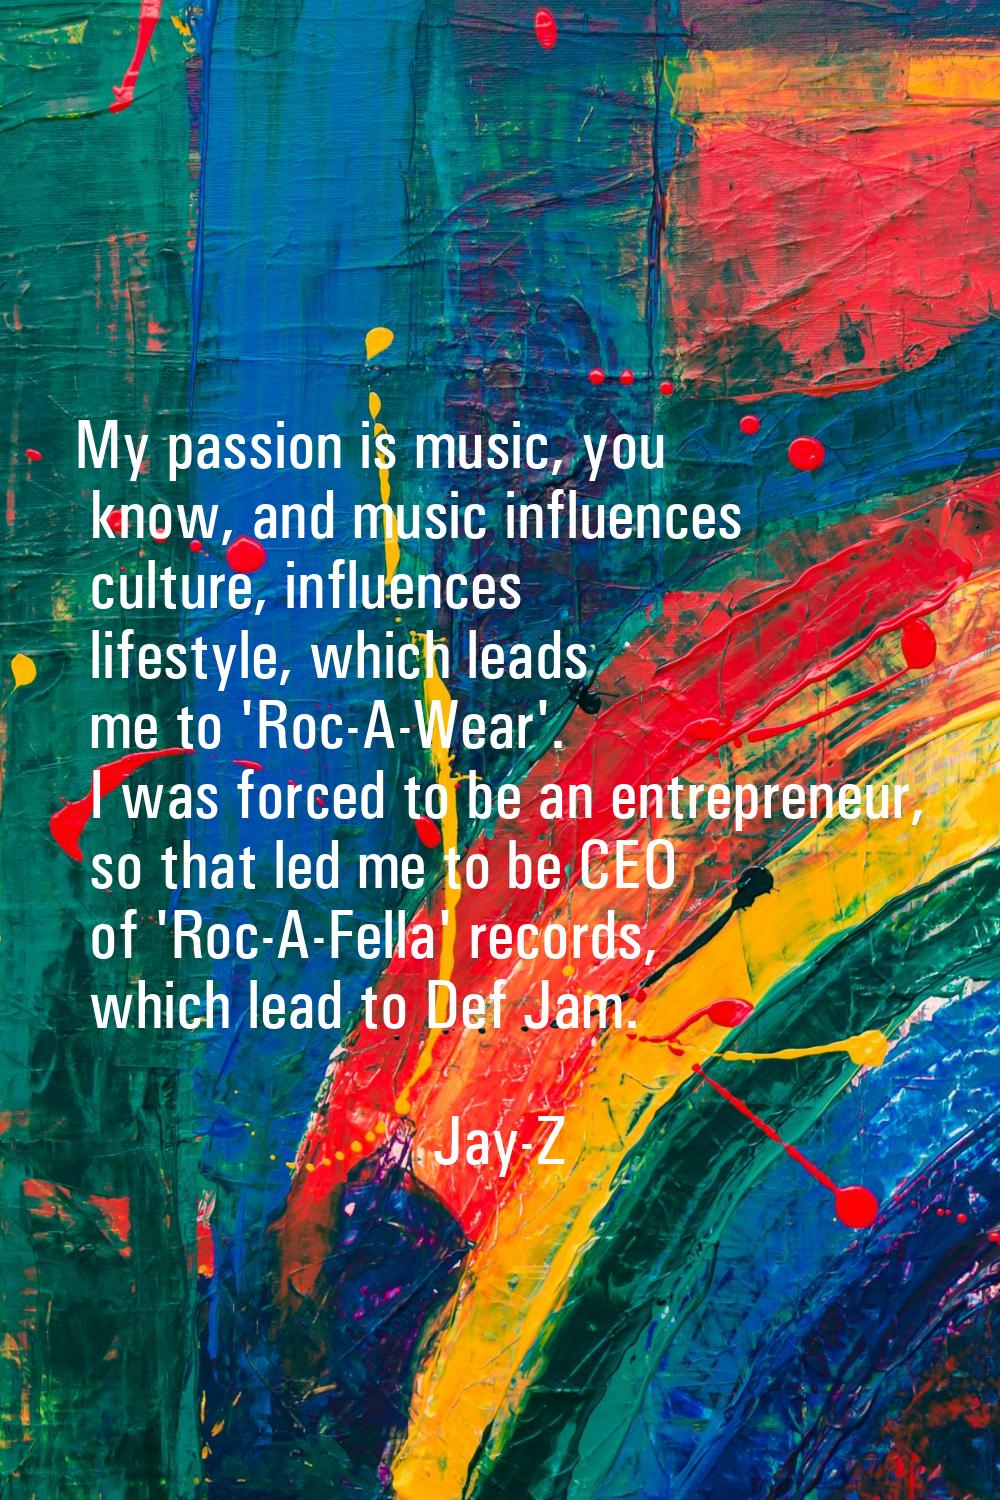 My passion is music, you know, and music influences culture, influences lifestyle, which leads me t